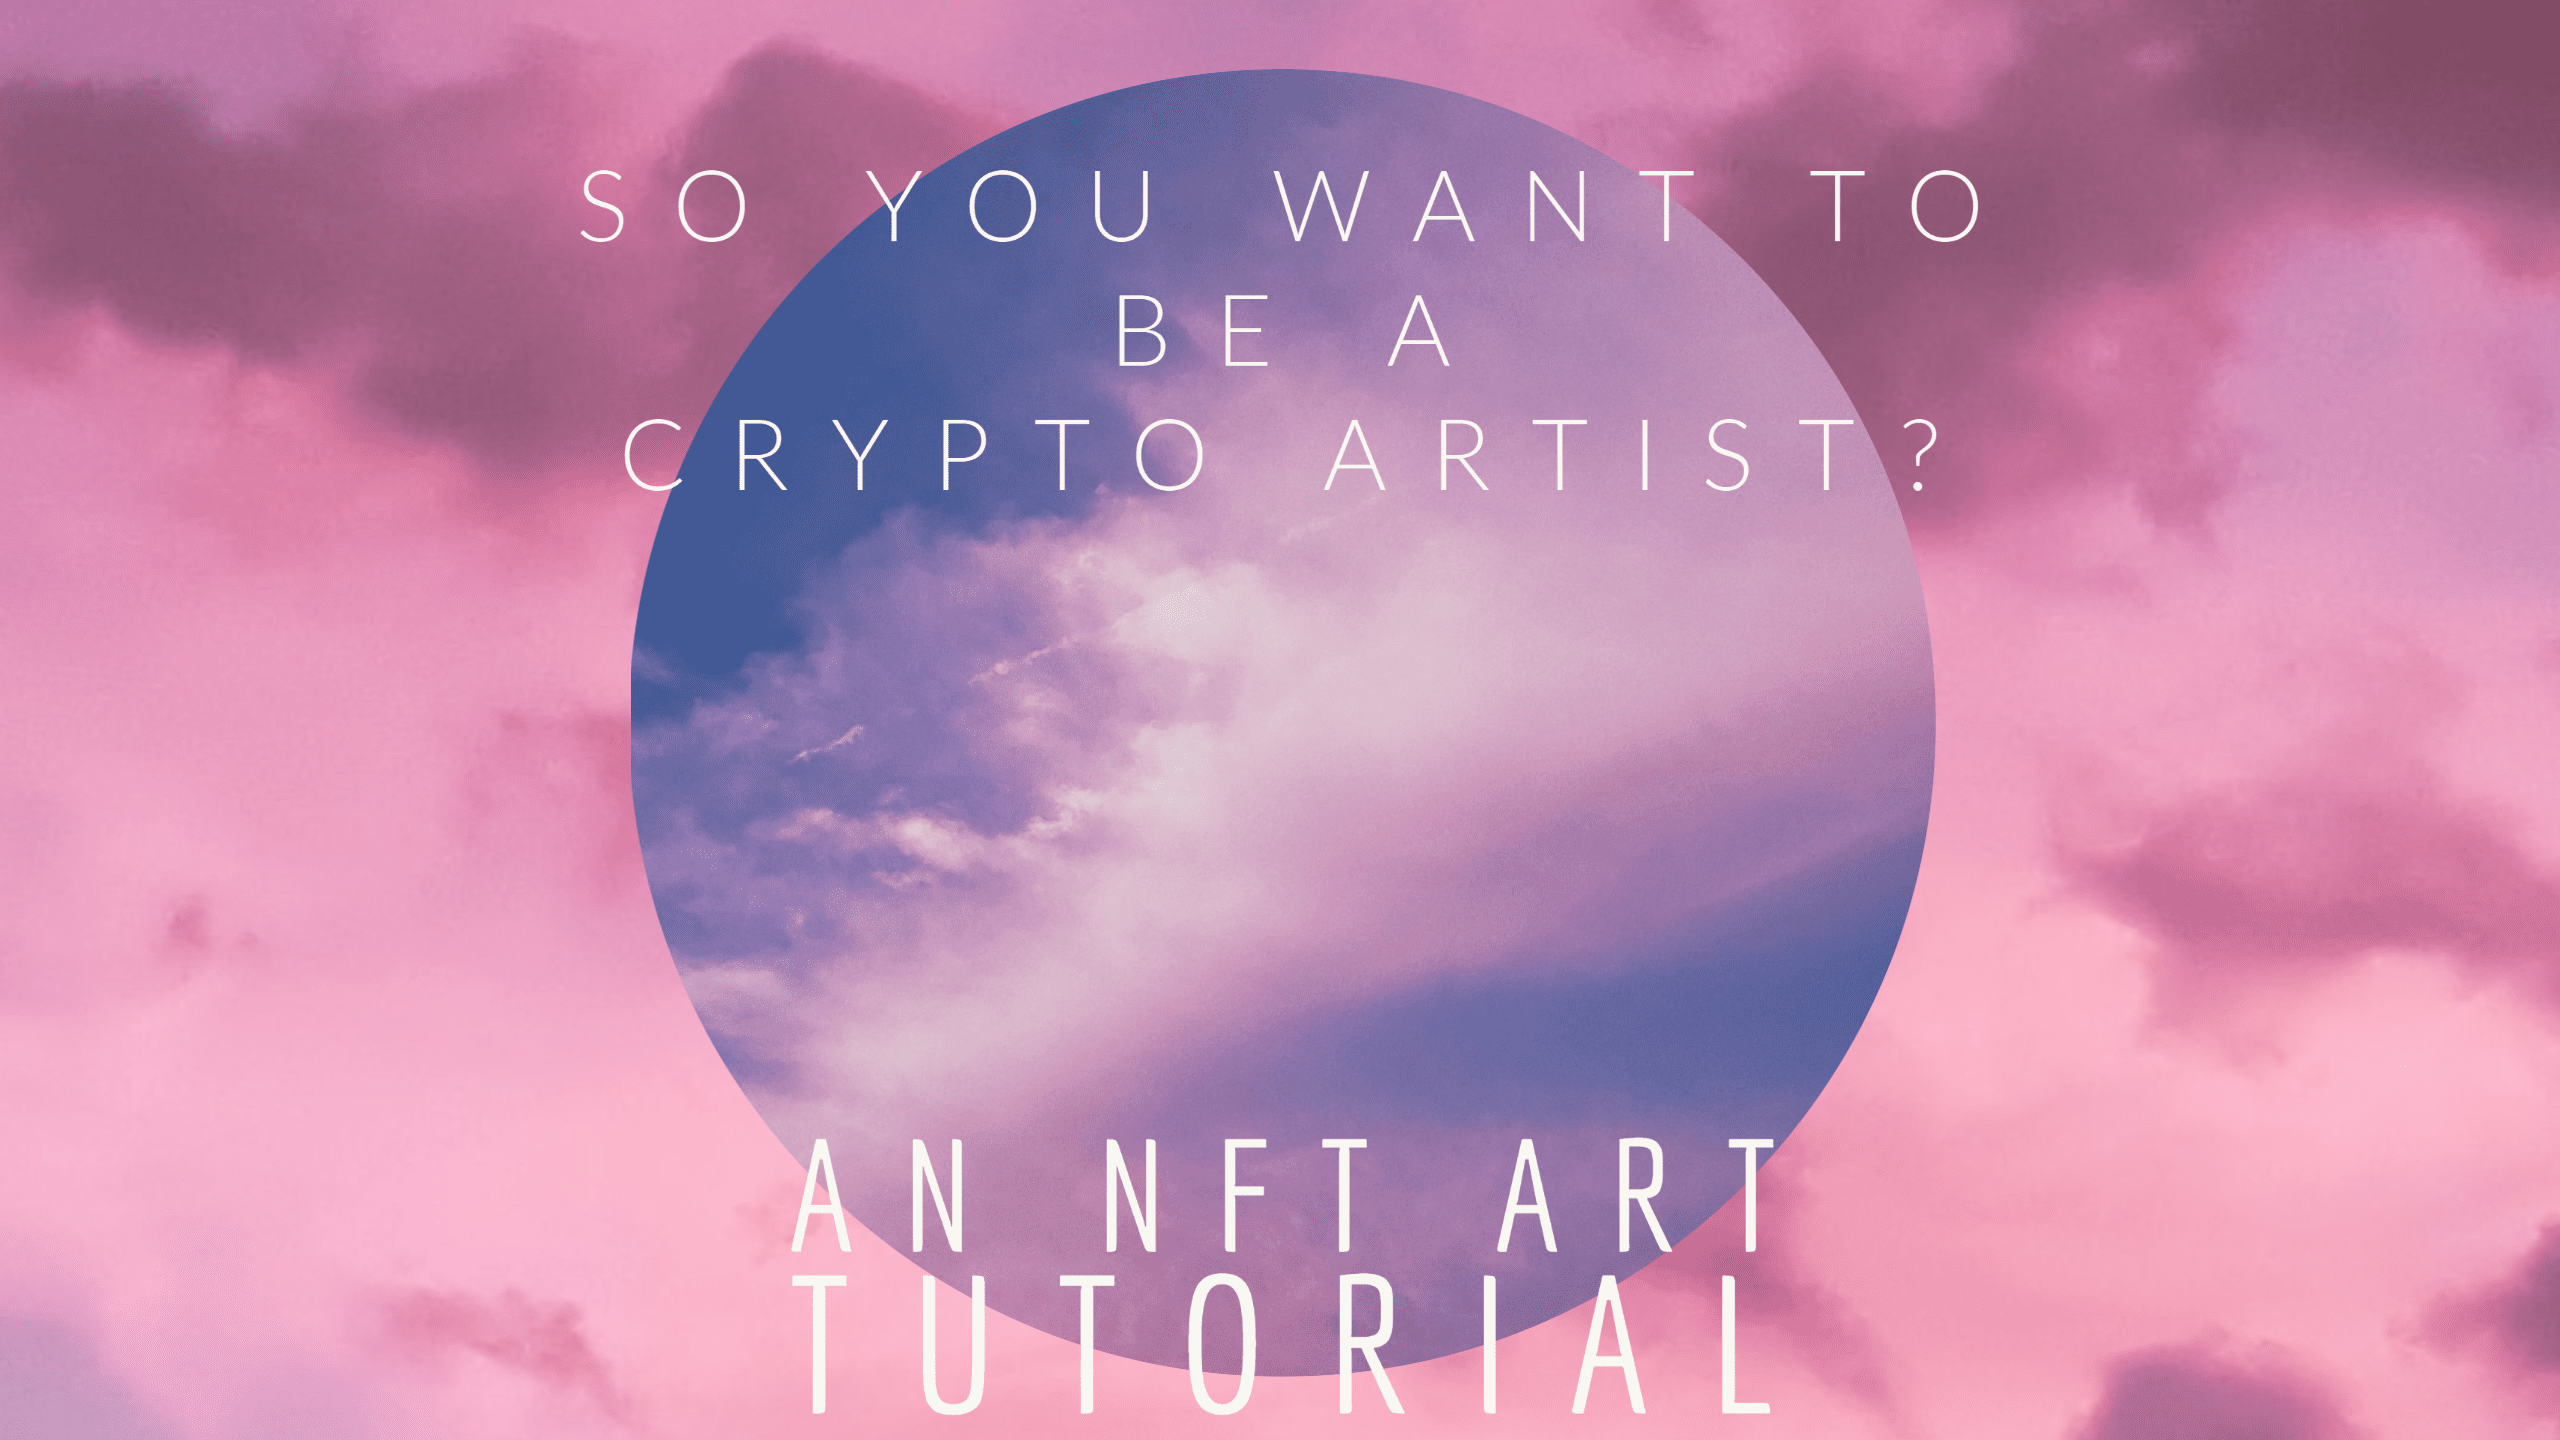 So you want to be a crypto artist?